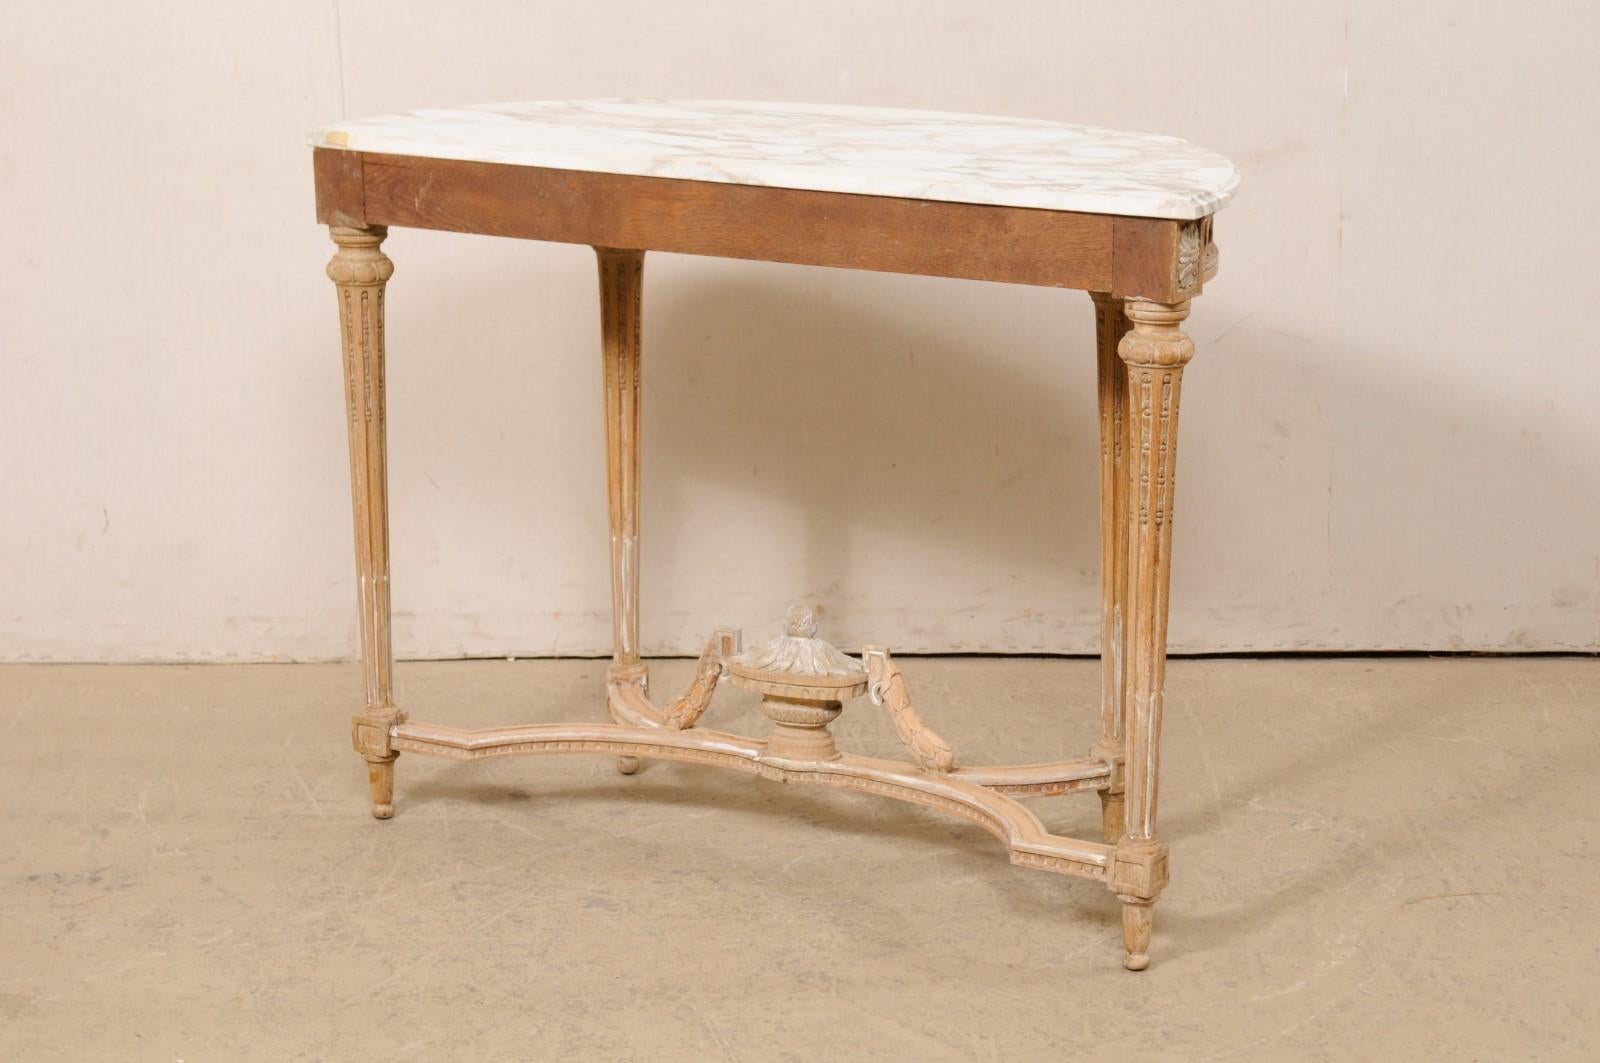 French Neoclassic Style Marble-Top Console Table W/Nice Urn Finial at Underside For Sale 2